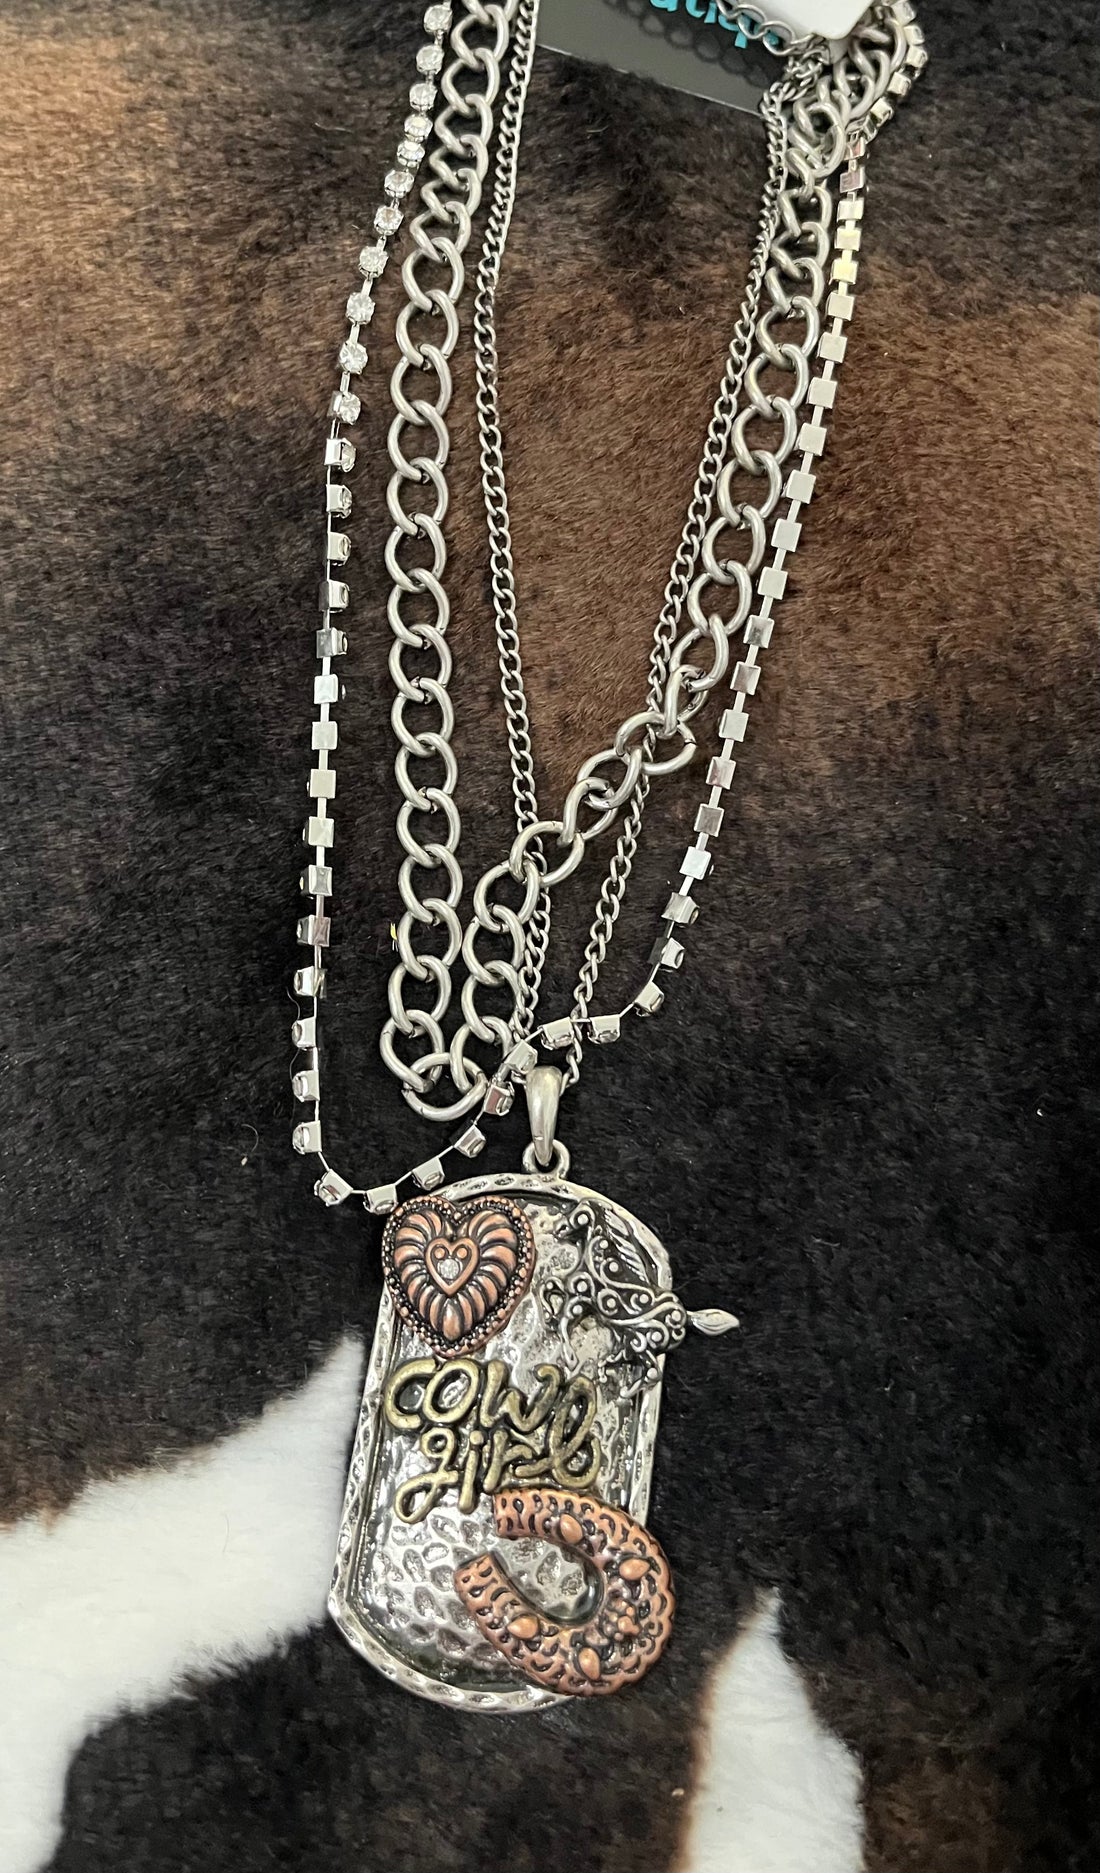 Layered Chain Necklace with Cowgirl Statement Pendant